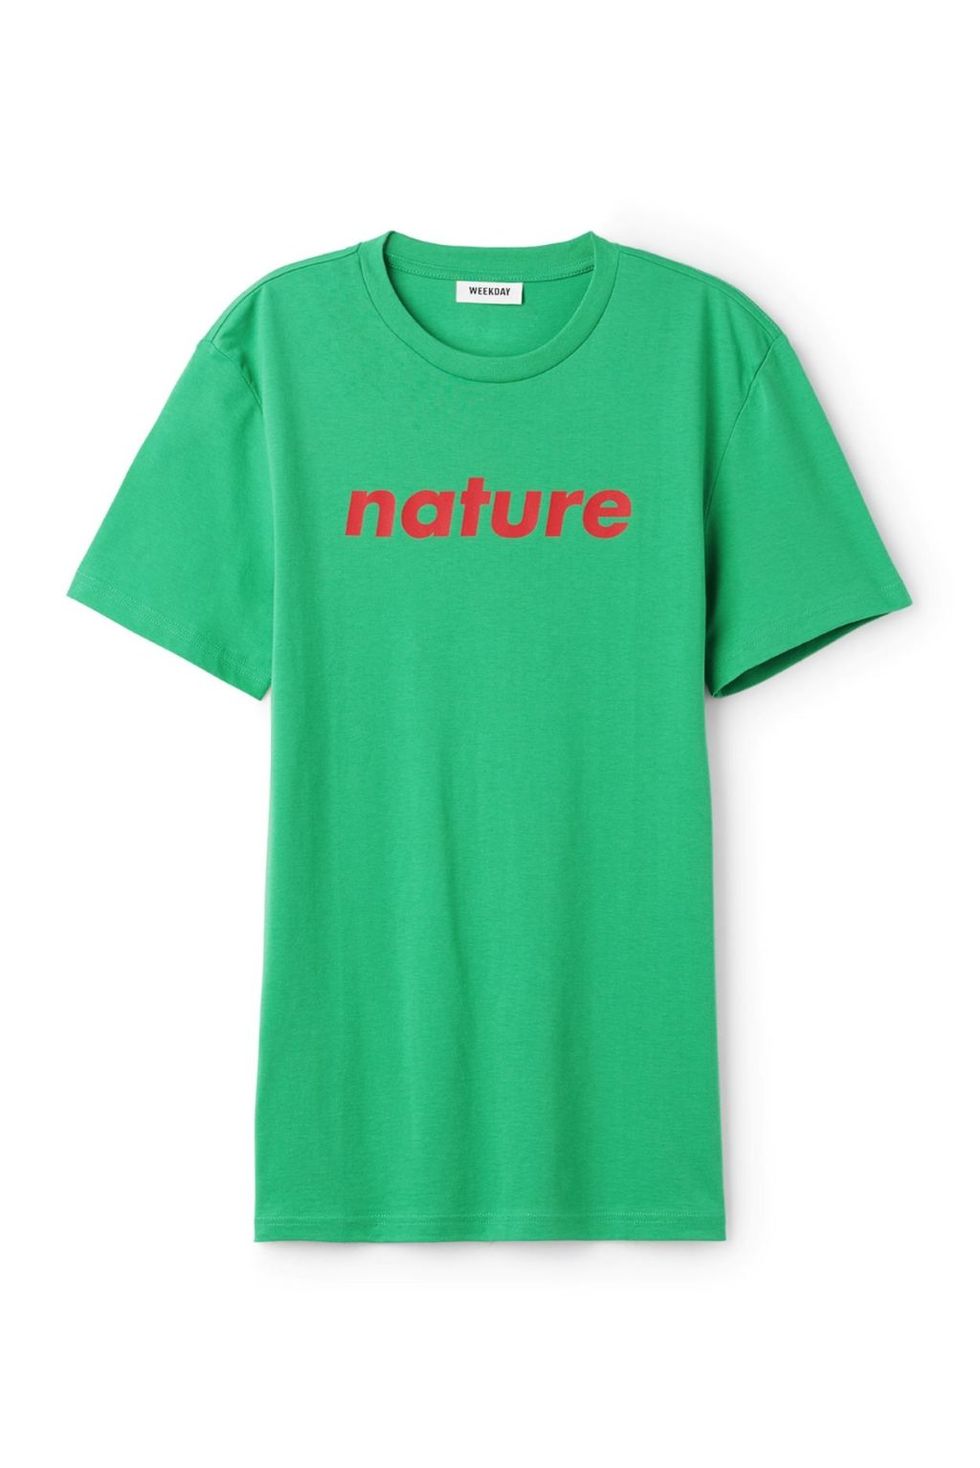 Green, Product, Sleeve, Text, White, Sportswear, T-shirt, Teal, Aqua, Turquoise, 